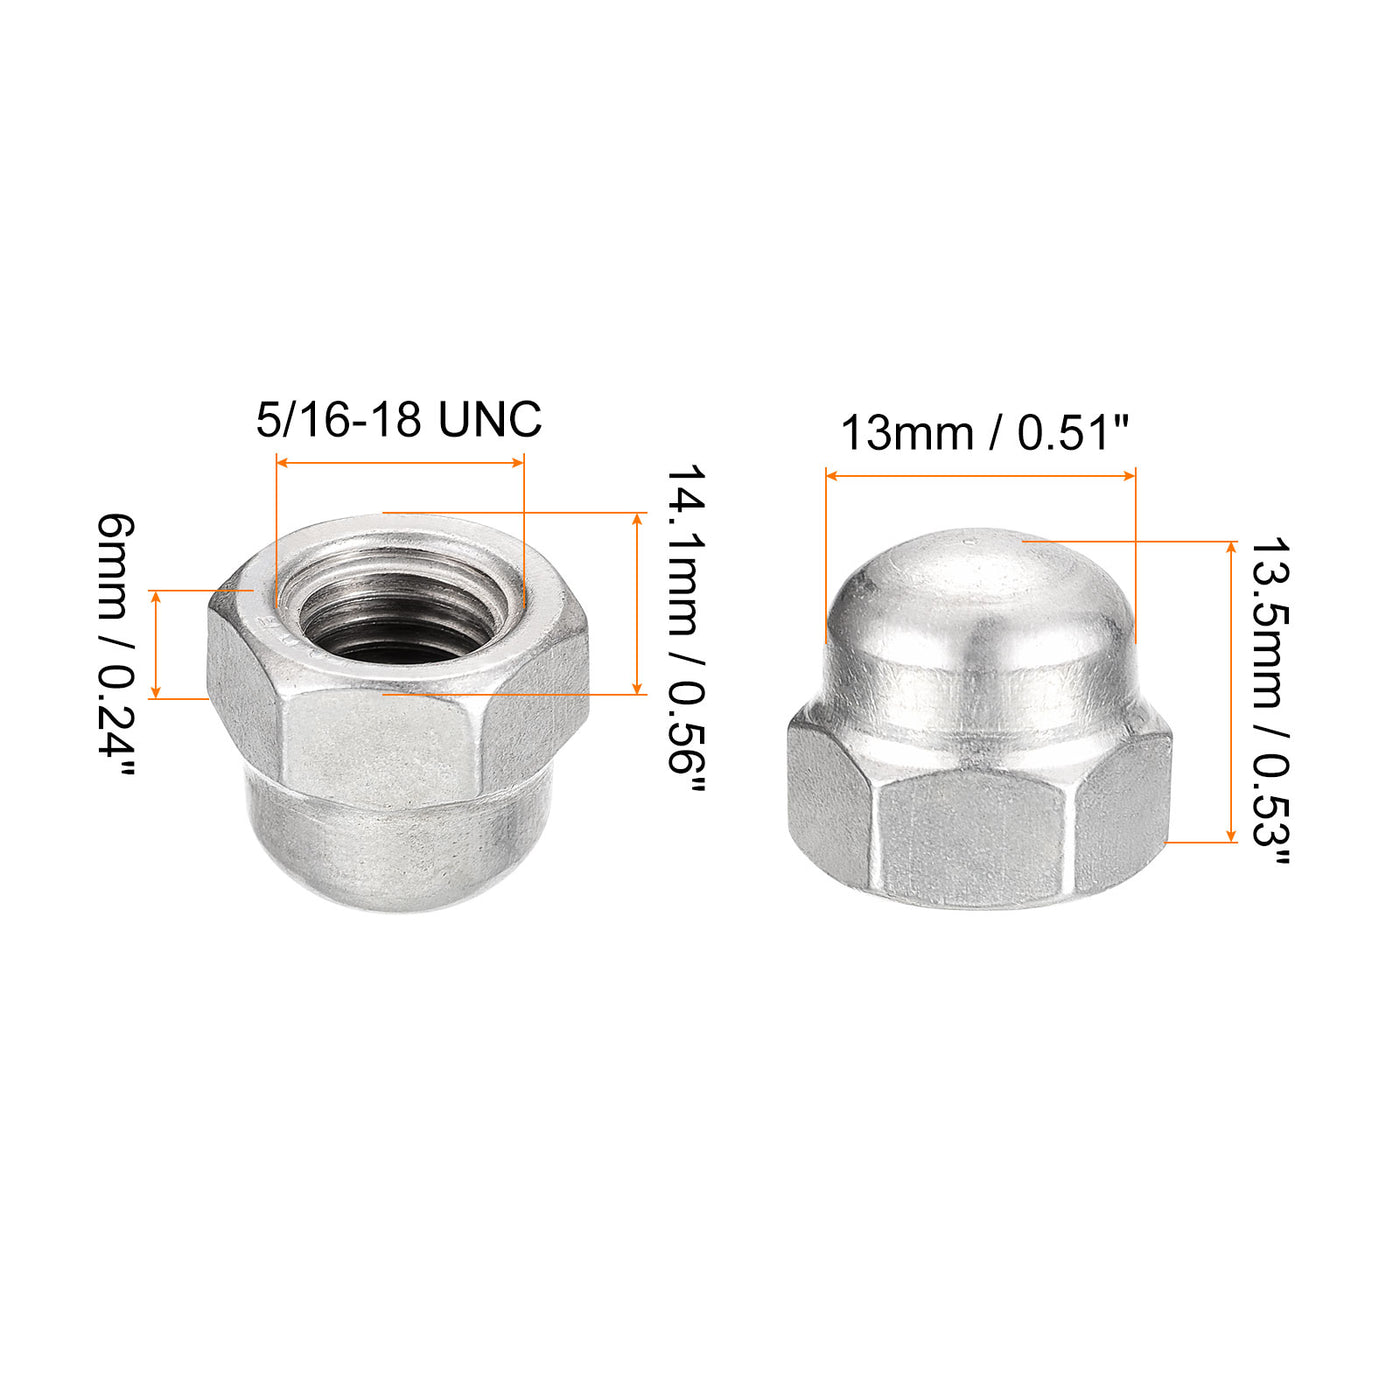 uxcell Uxcell 5/16-18 Acorn Cap Nuts,25pcs - 304 Stainless Steel Hardware Nuts, Acorn Hex Cap Dome Head Nuts for Fasteners (Silver)